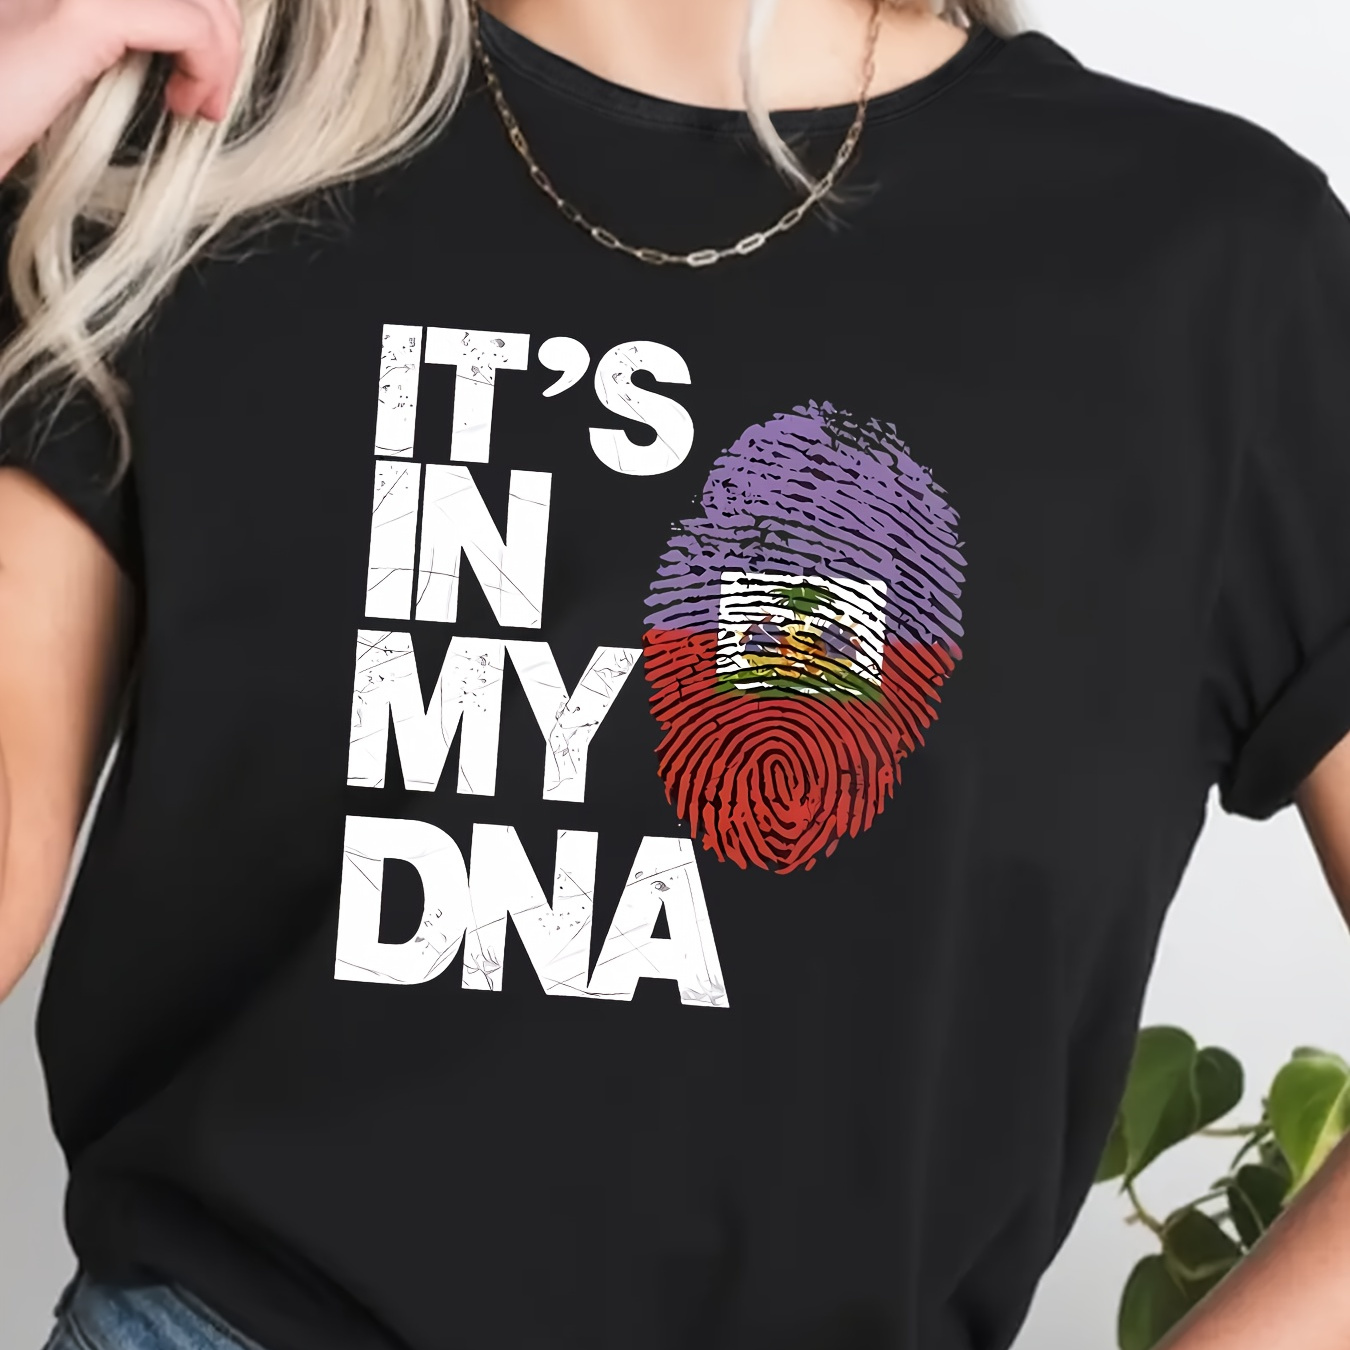 

It's In My Dna Graphic Short Sleeve T-shirt, Women's Crew Neck Casual Sports T-shirt, Women's Activewear